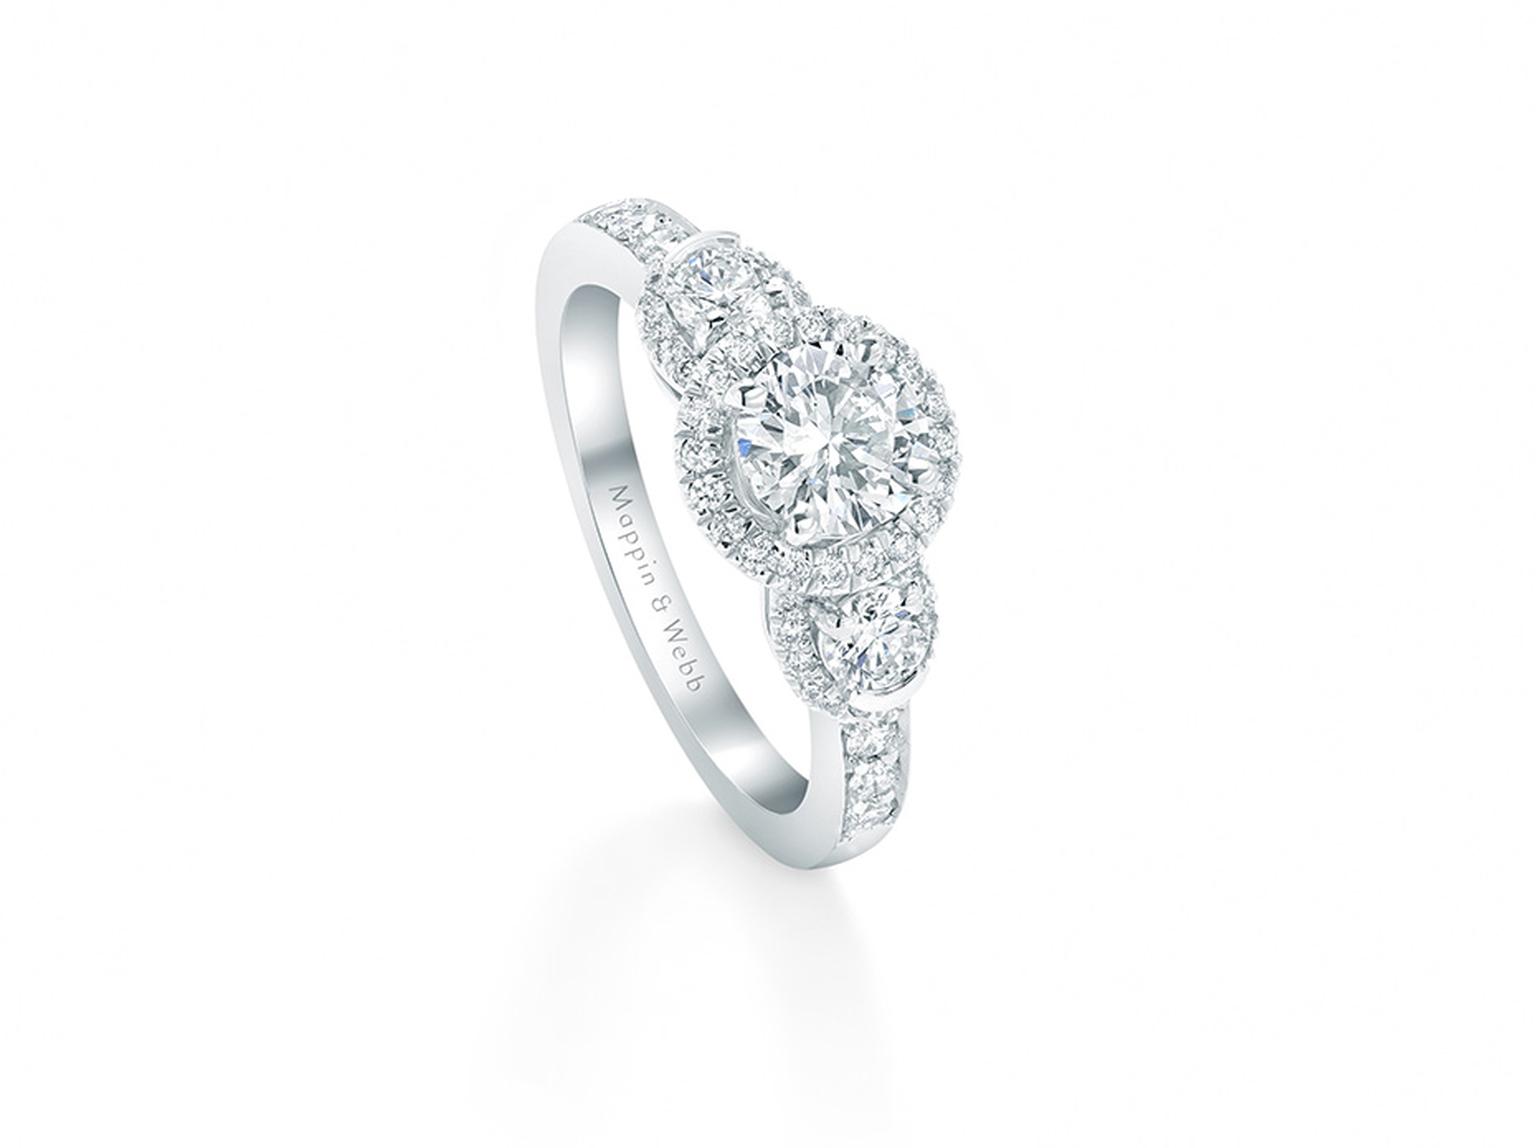 The Eglantine engagement ring from Mappin & Webb's new bridal collection showcases a trio of cushion-cut solitare diamonds